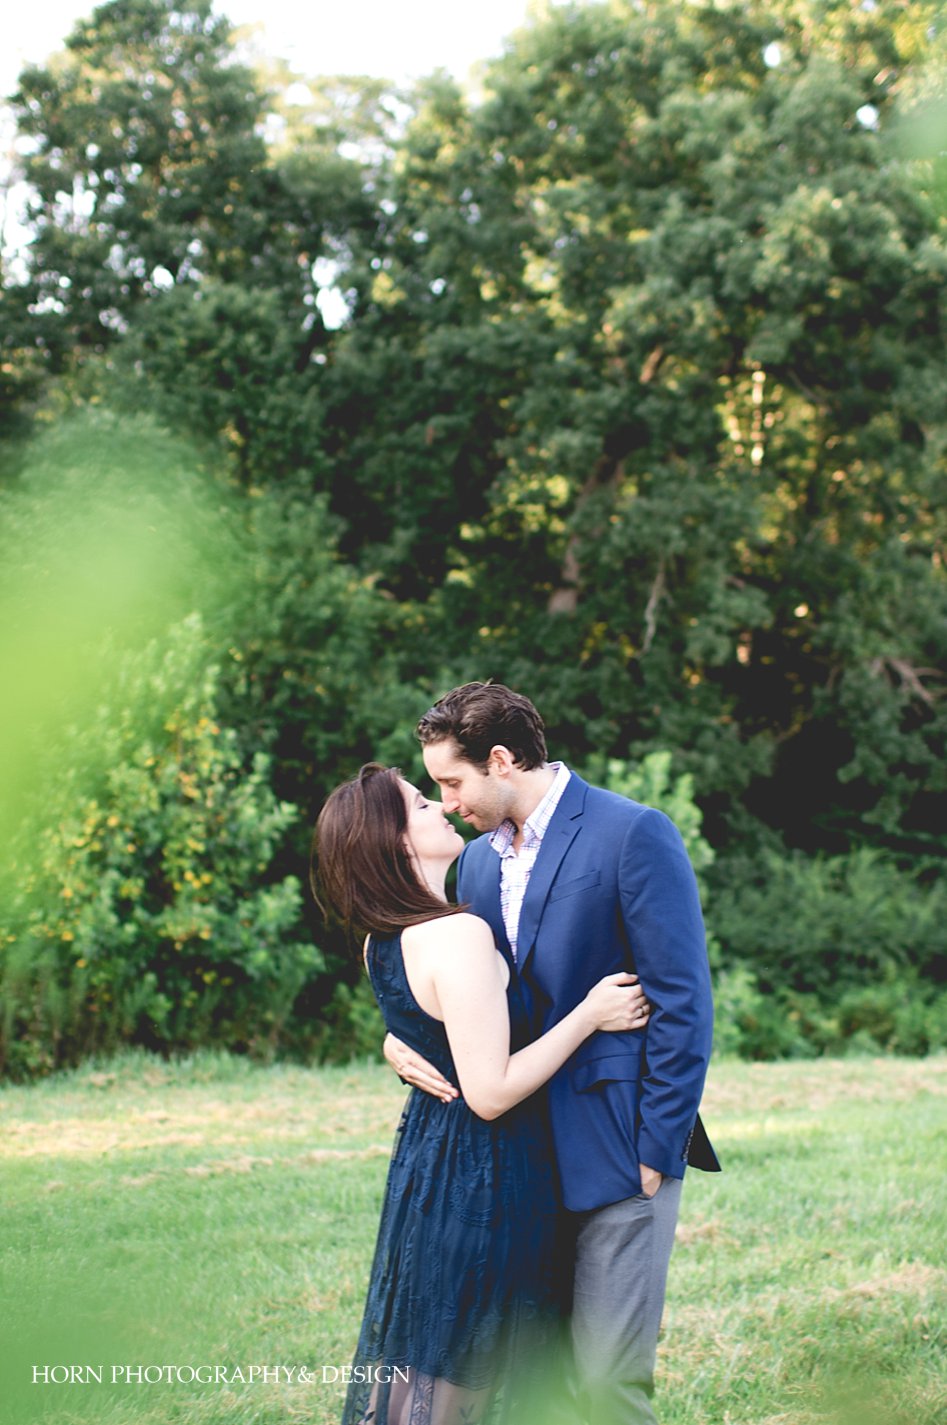 guy and girl hold one another in Dahlonega Georgia horn photography and design wedding photographers 